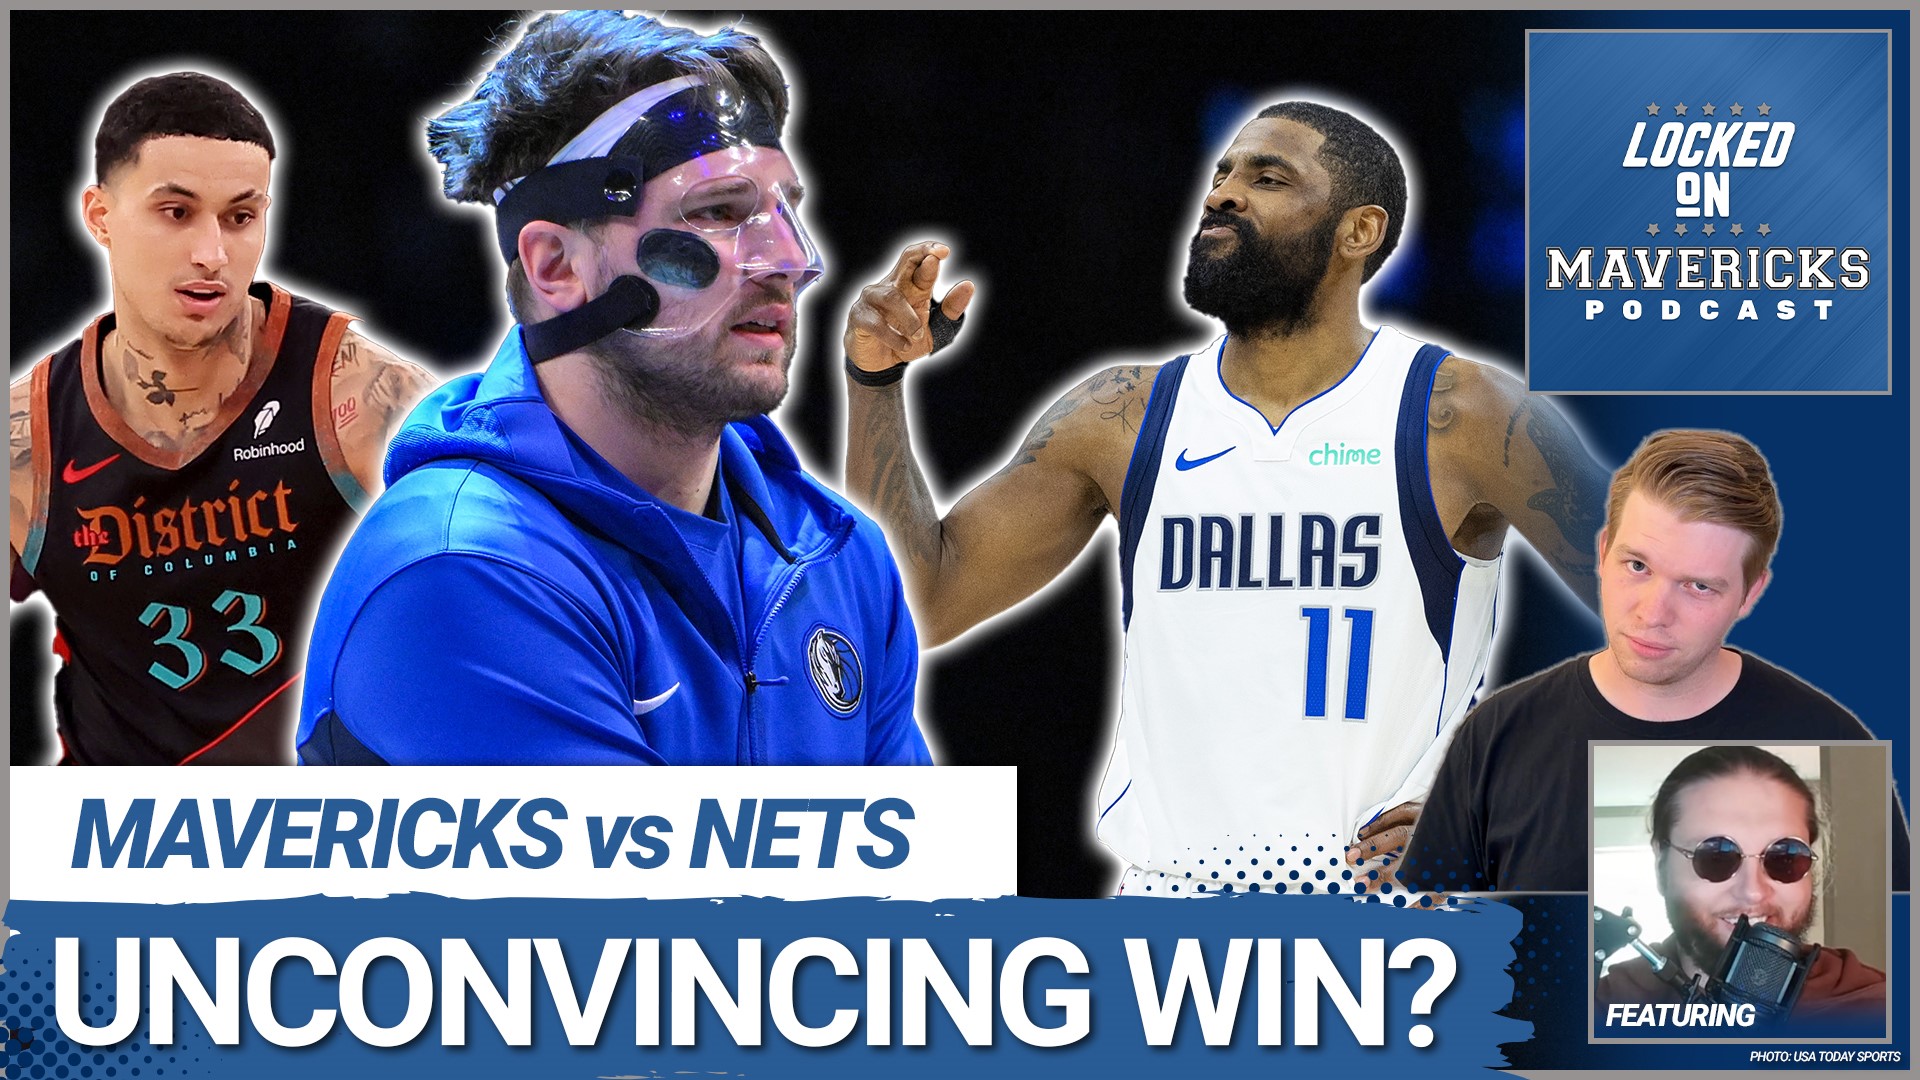 Nick Angstadt & Slightly Biased breakdown the Dallas Mavericks beat the Nets behind Luka Doncic & Kyrie Irvng's leadership, then is the Kyle Kuzma rumor dead?